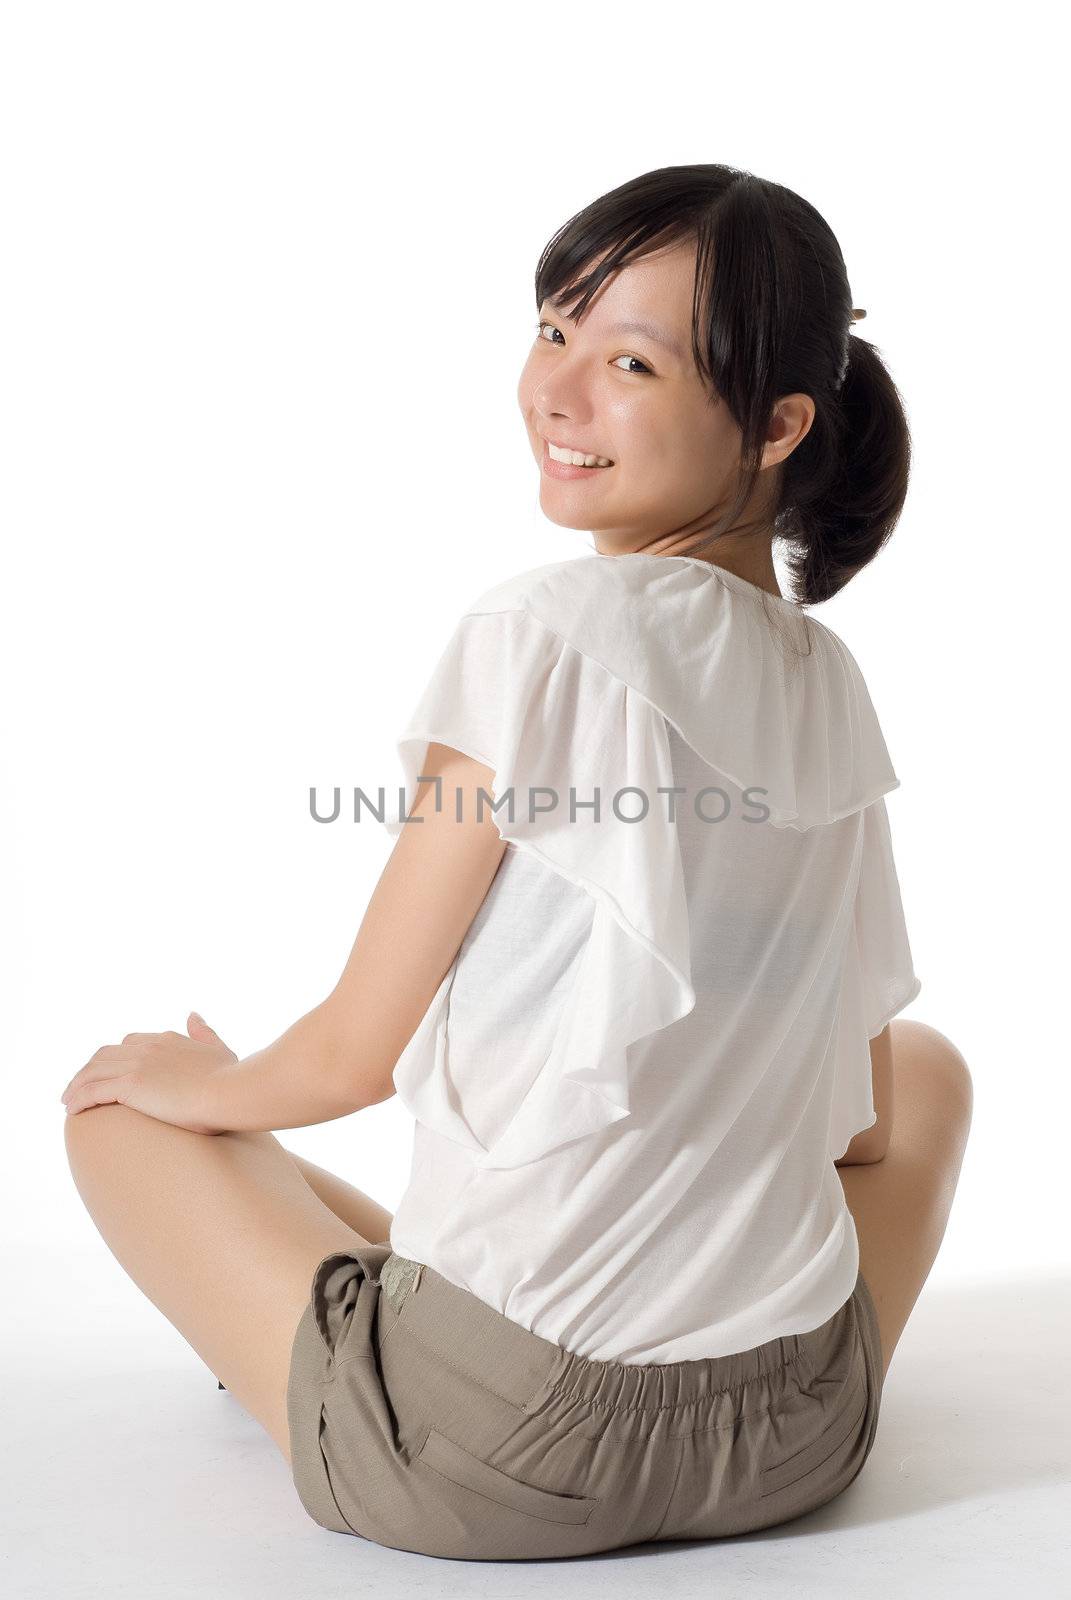 Happy smiling beauty sit on ground, full length portrait on white background.